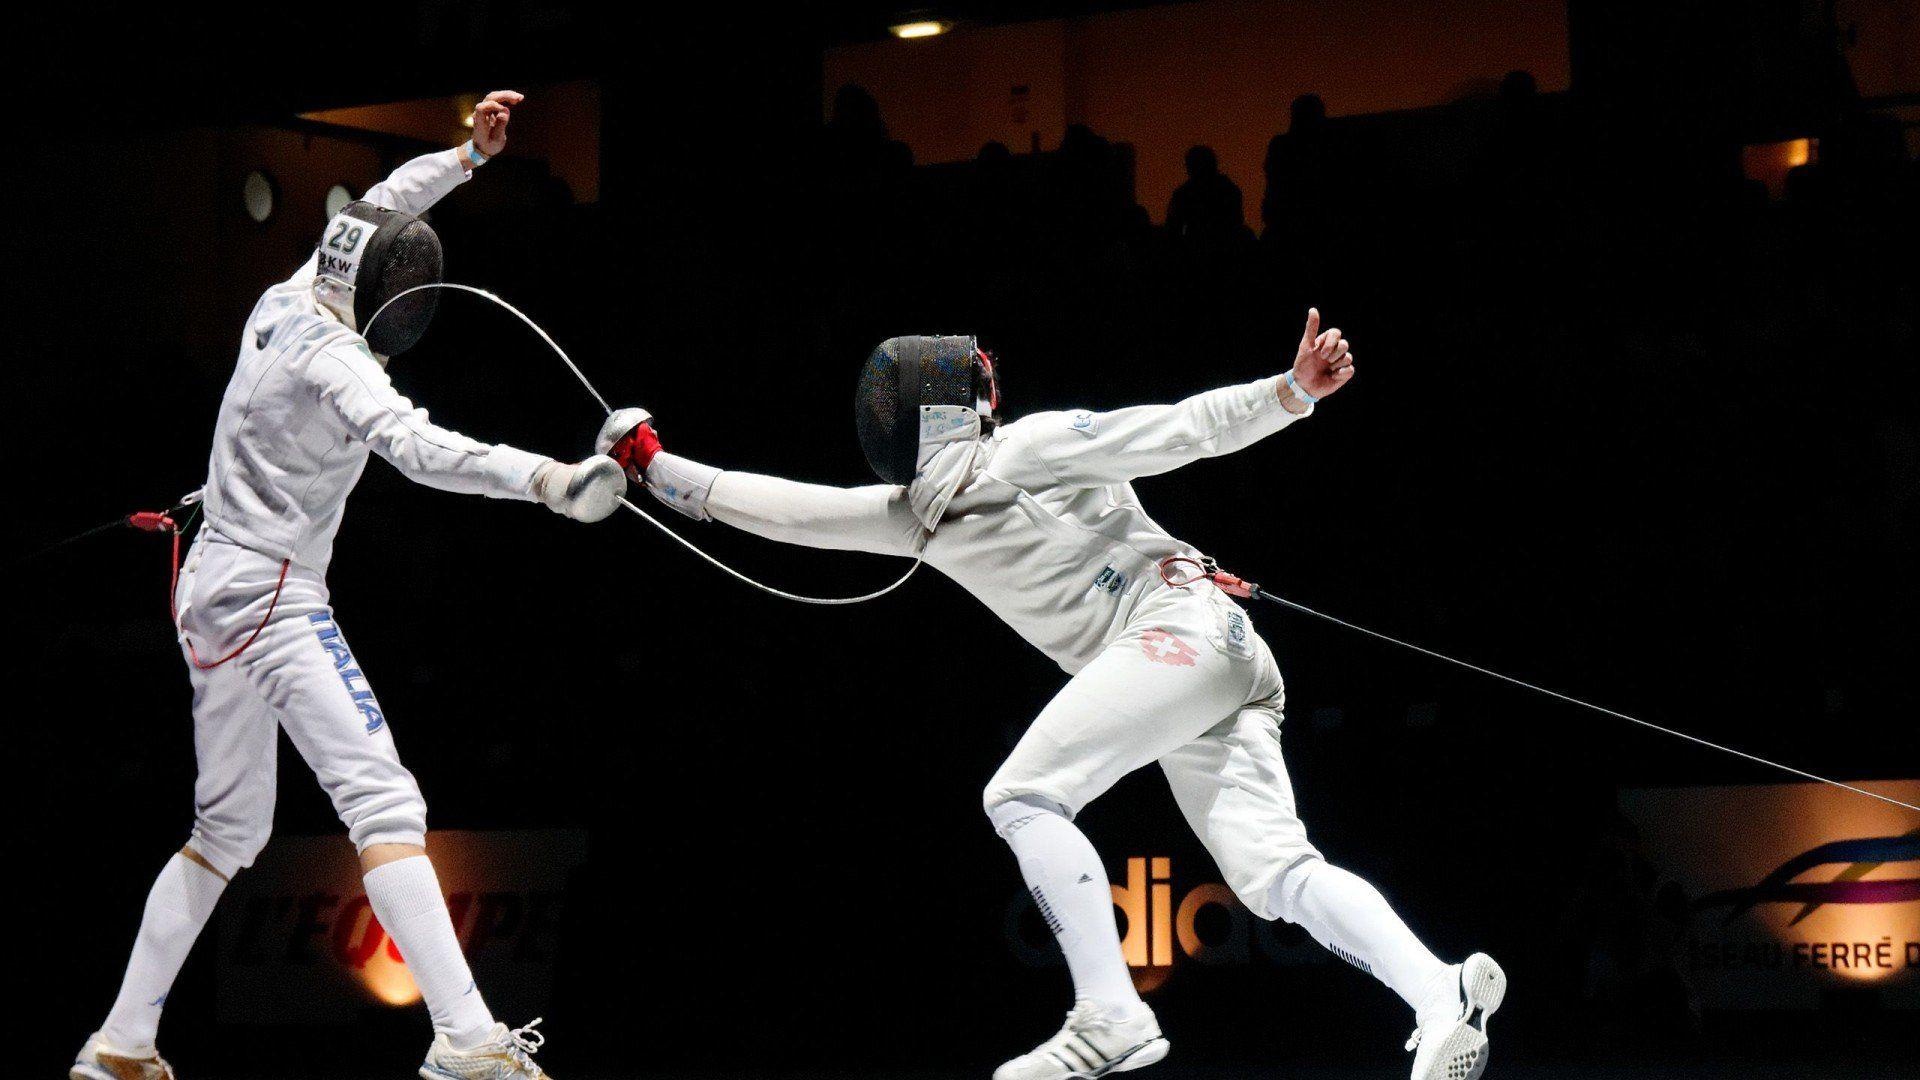 HD wallpaper, Fencing Equipment, 1920X1080 Full Hd Desktop, Fencing Skills, Desktop 1080P Fencing Background Image, Competitive Sport, Fencers In Action